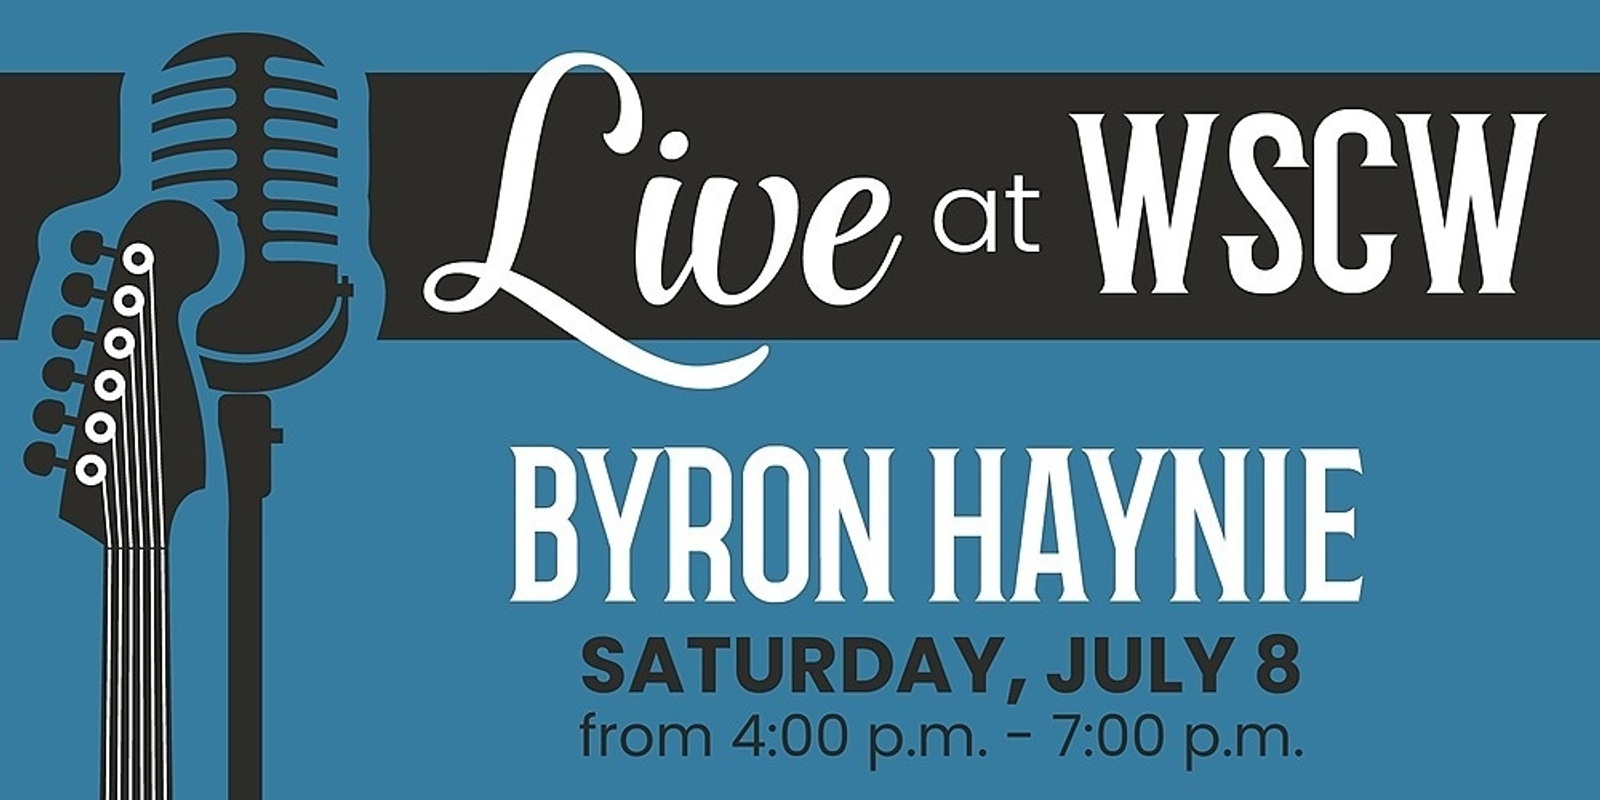 Banner image for Byron Haynie Live at WSCW July 8